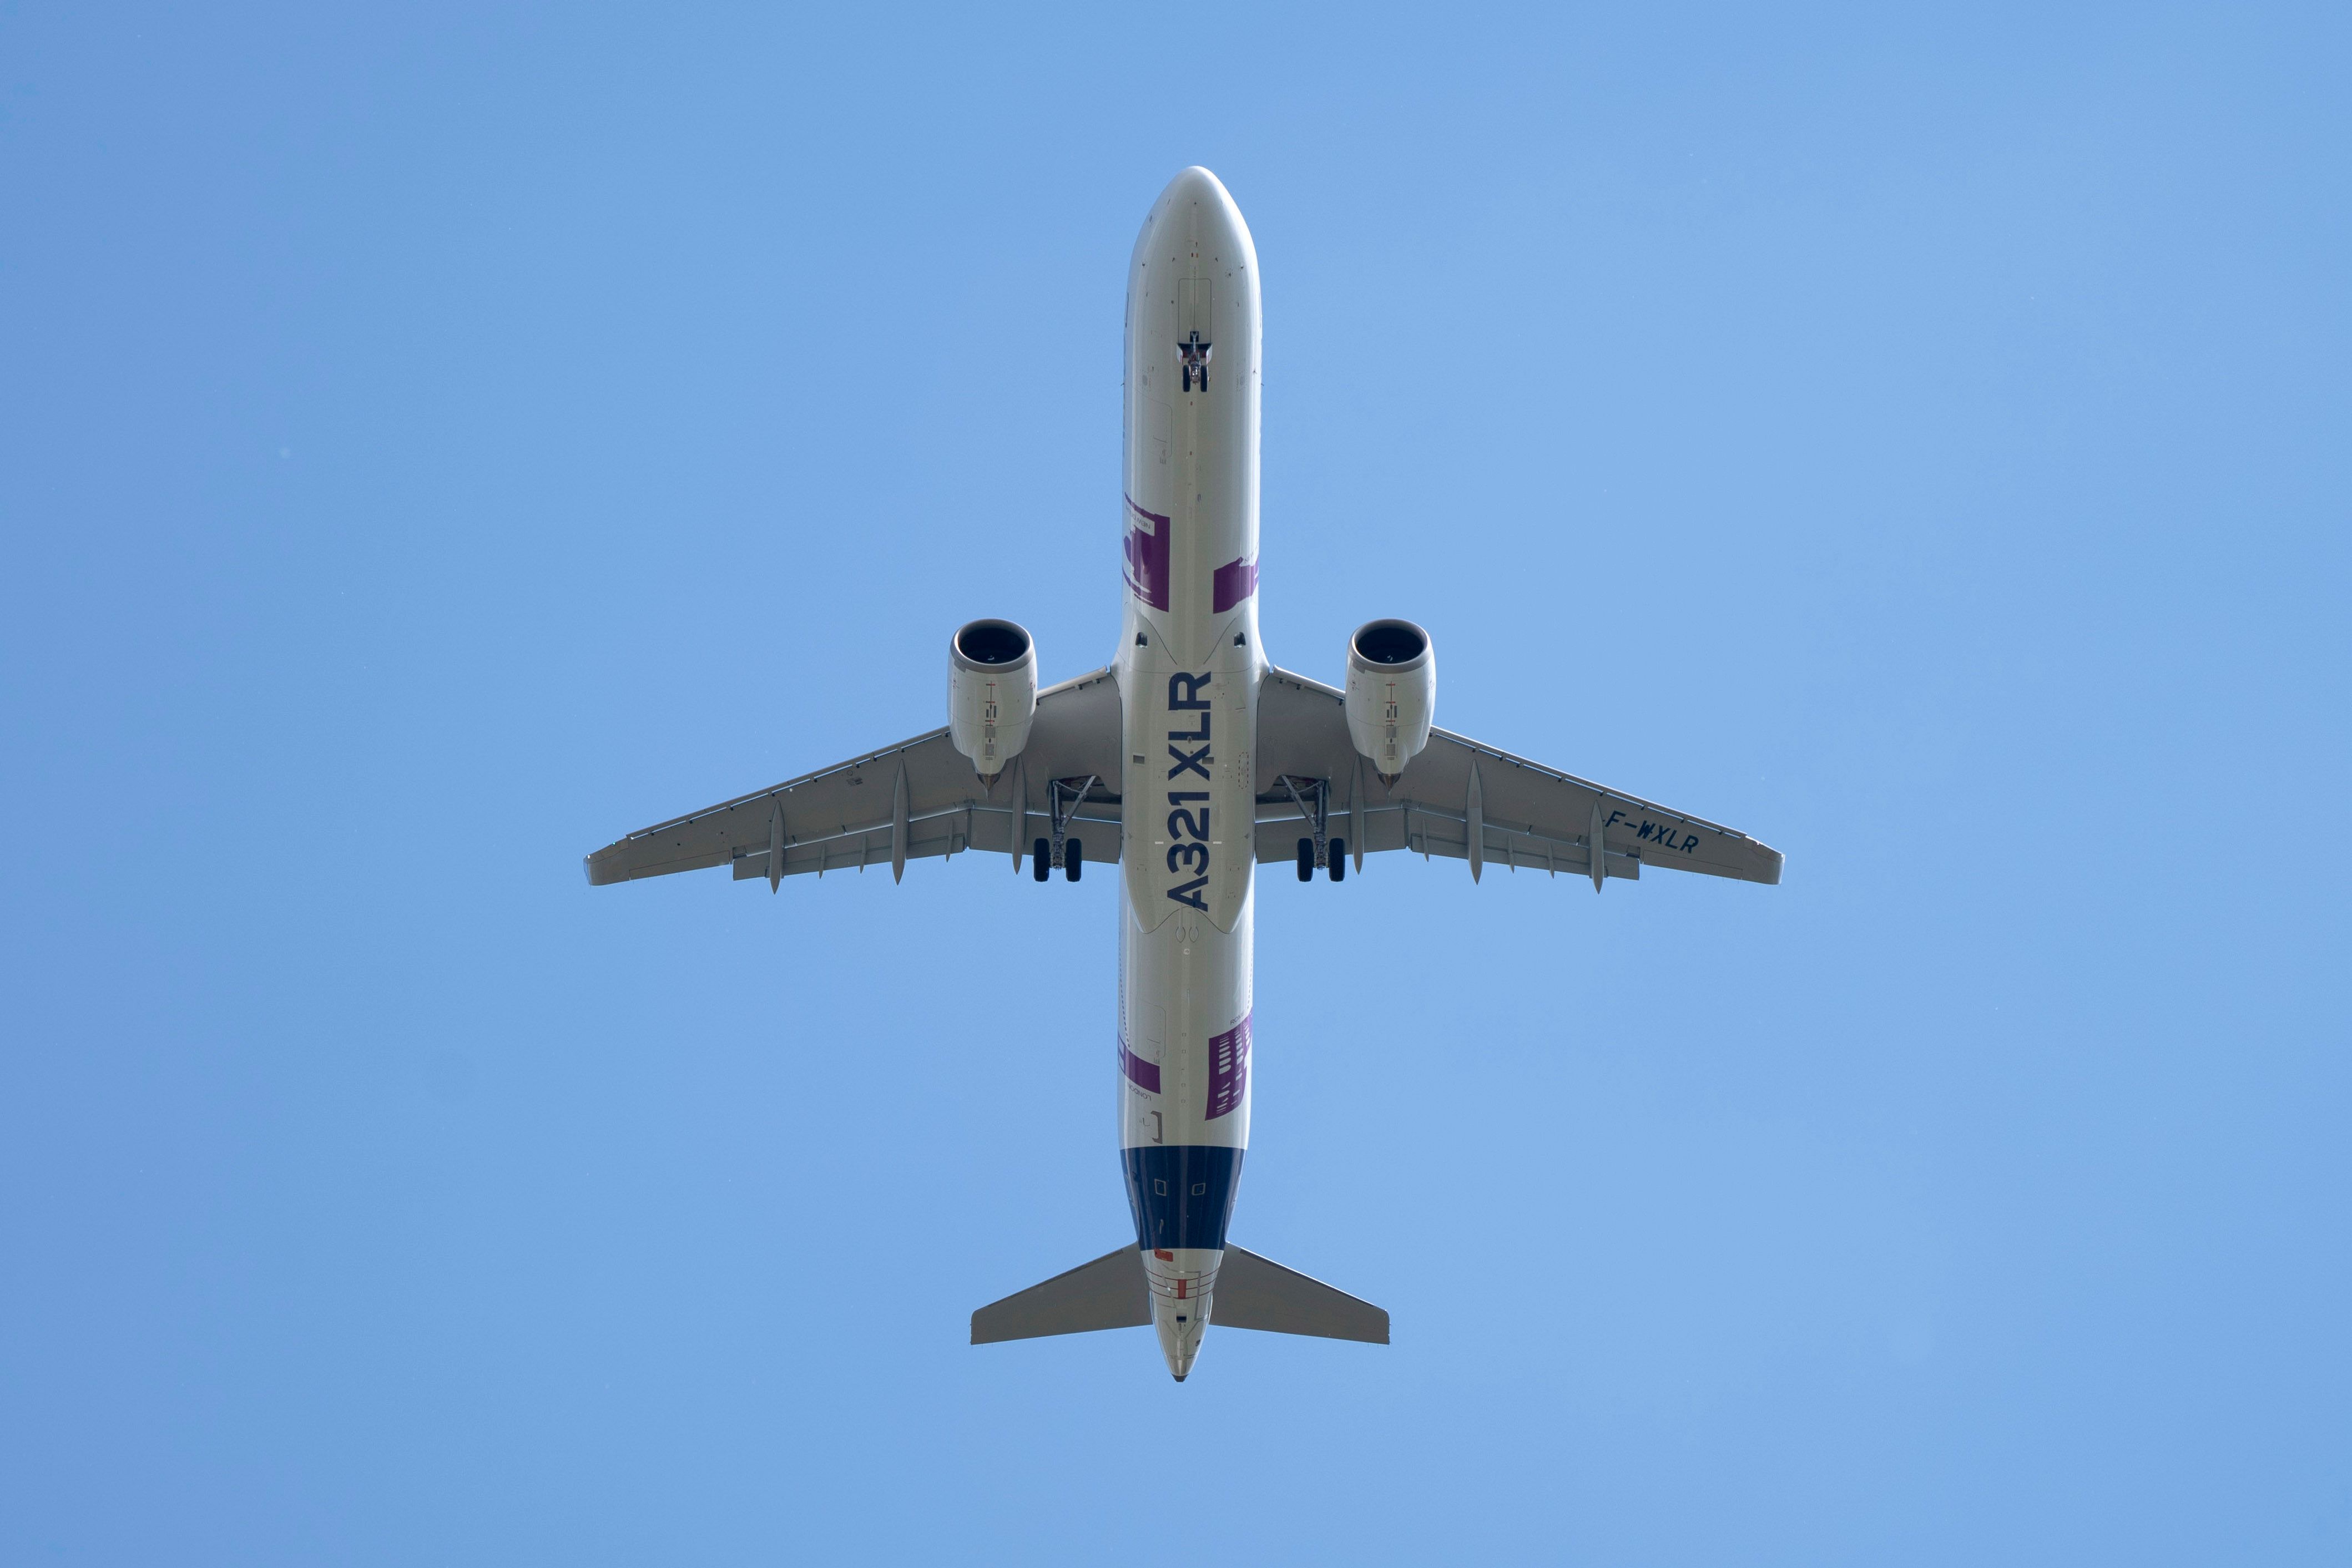 View from the ground looking up at an Airbus A321XLR flying overhead.